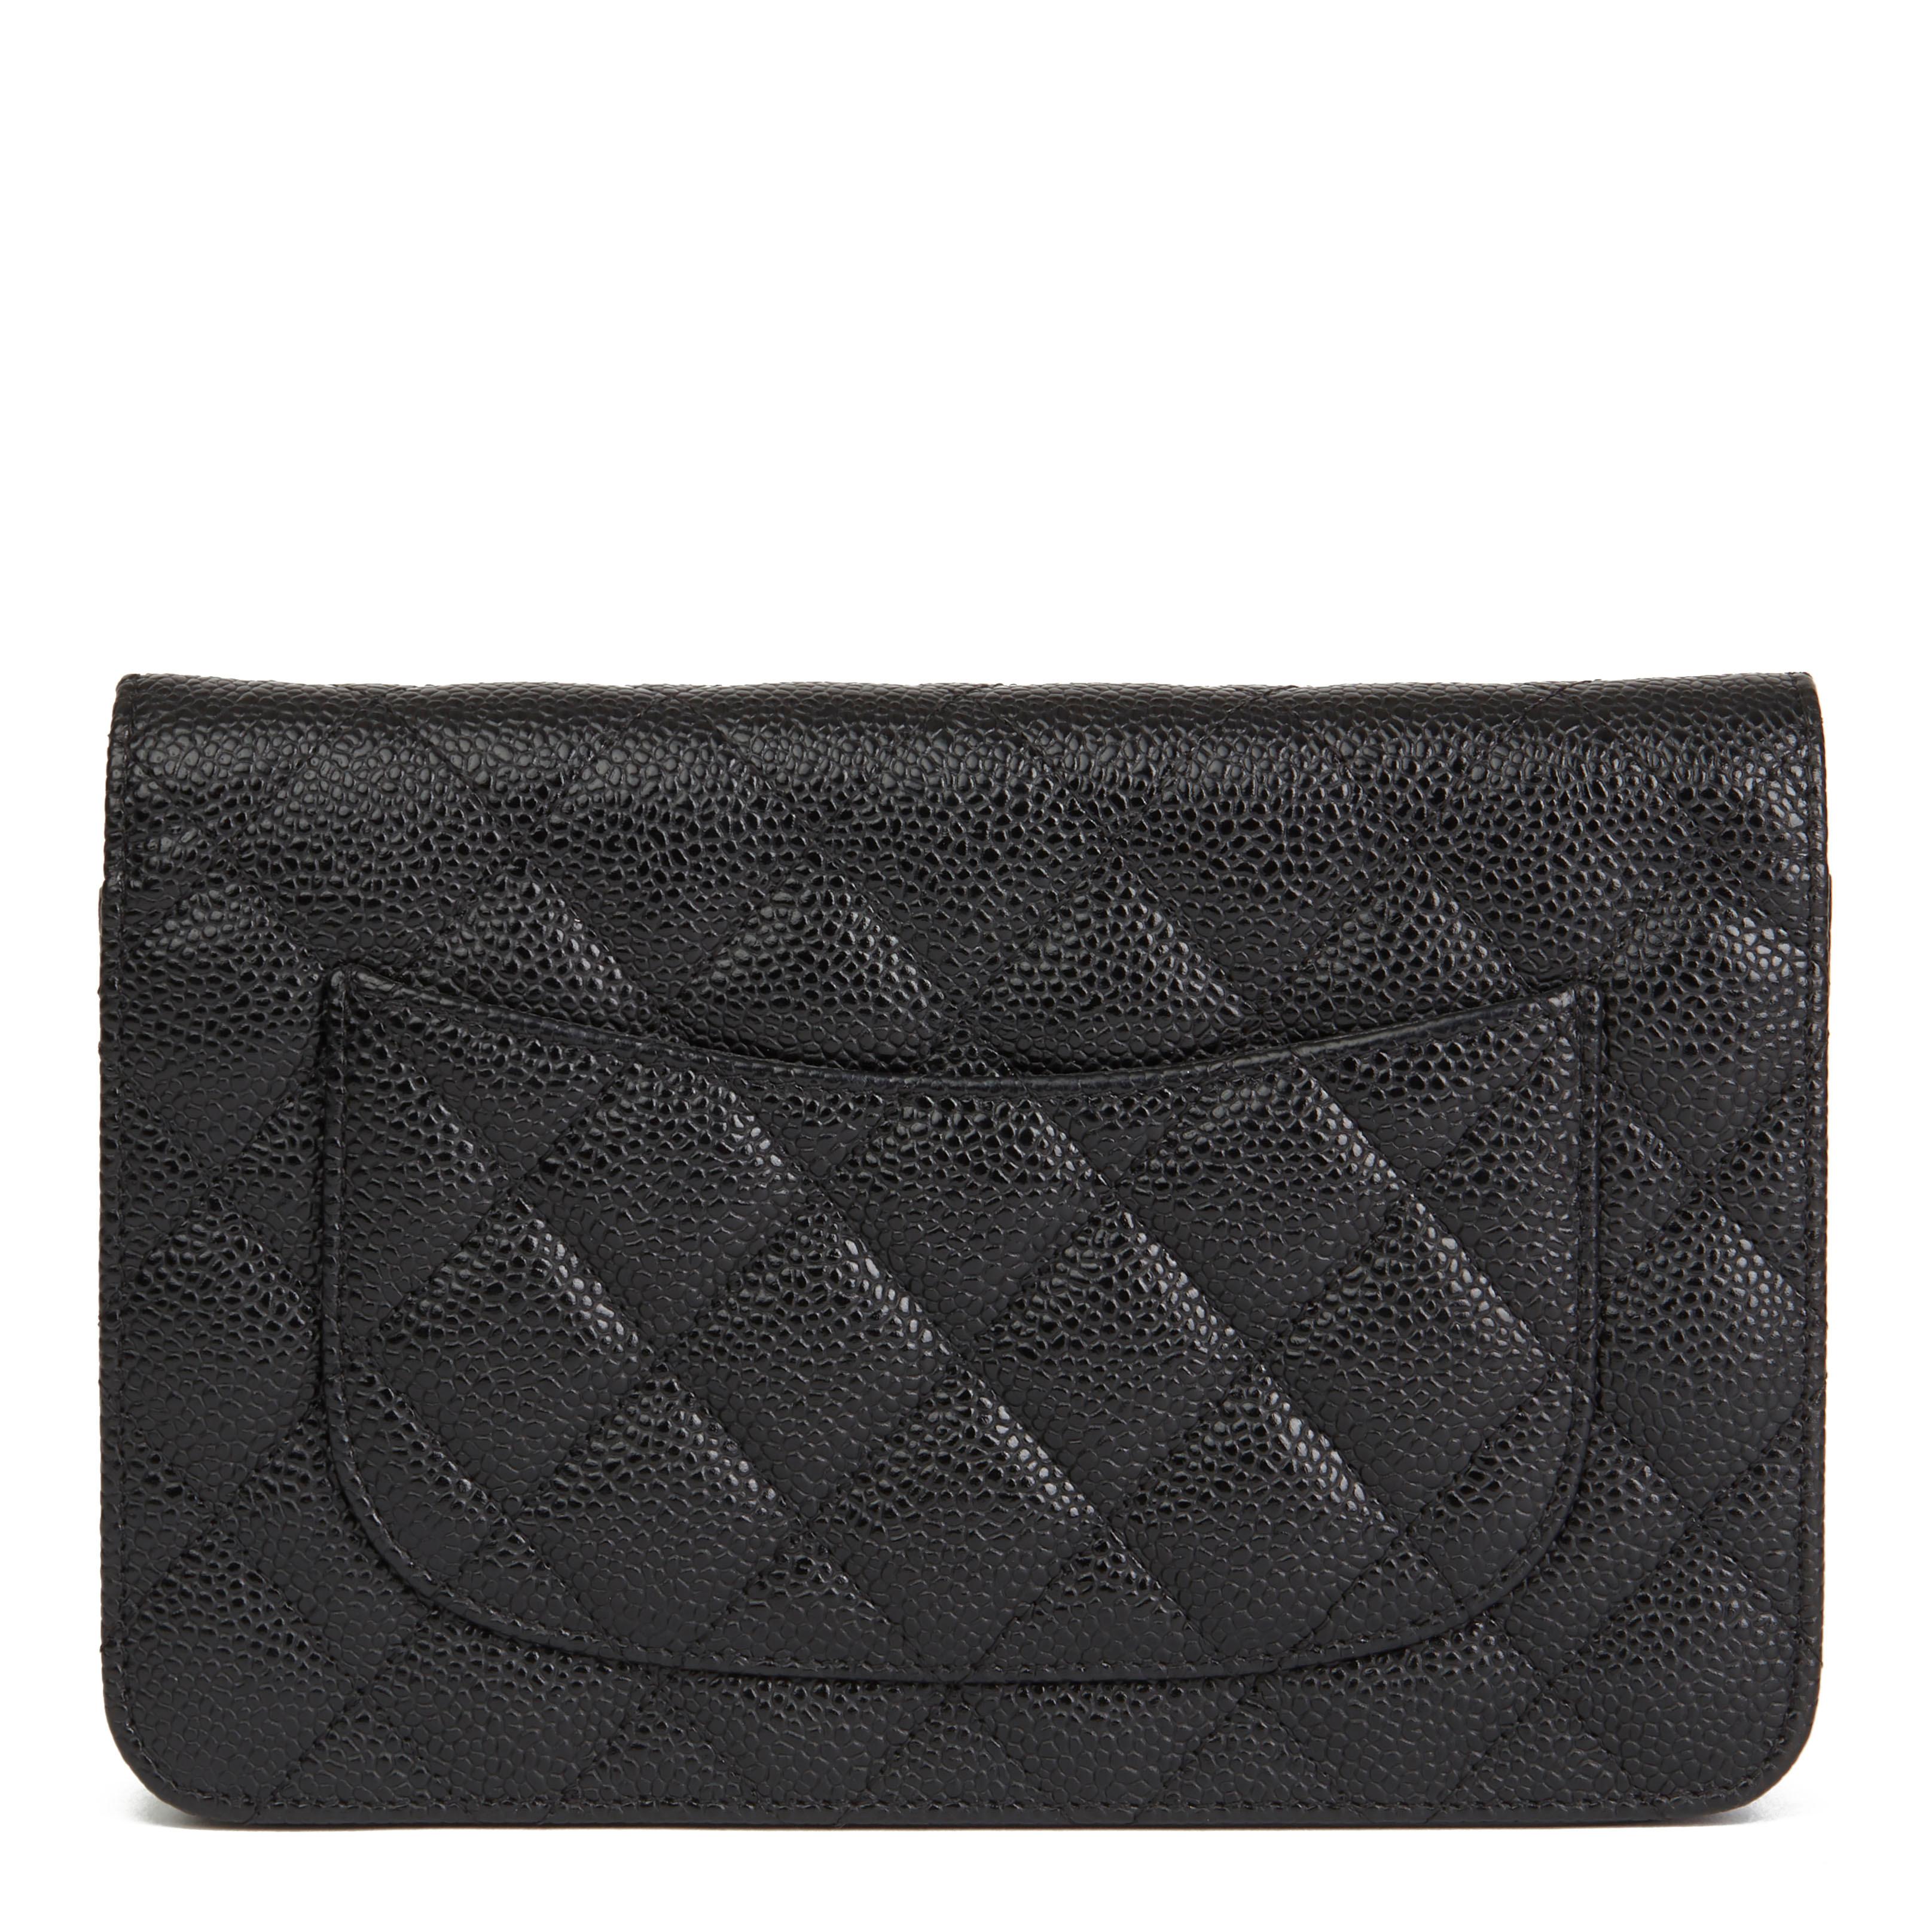 Women's 2014 Chanel Black Quilted Caviar Leather Wallet-on-Chain WOC